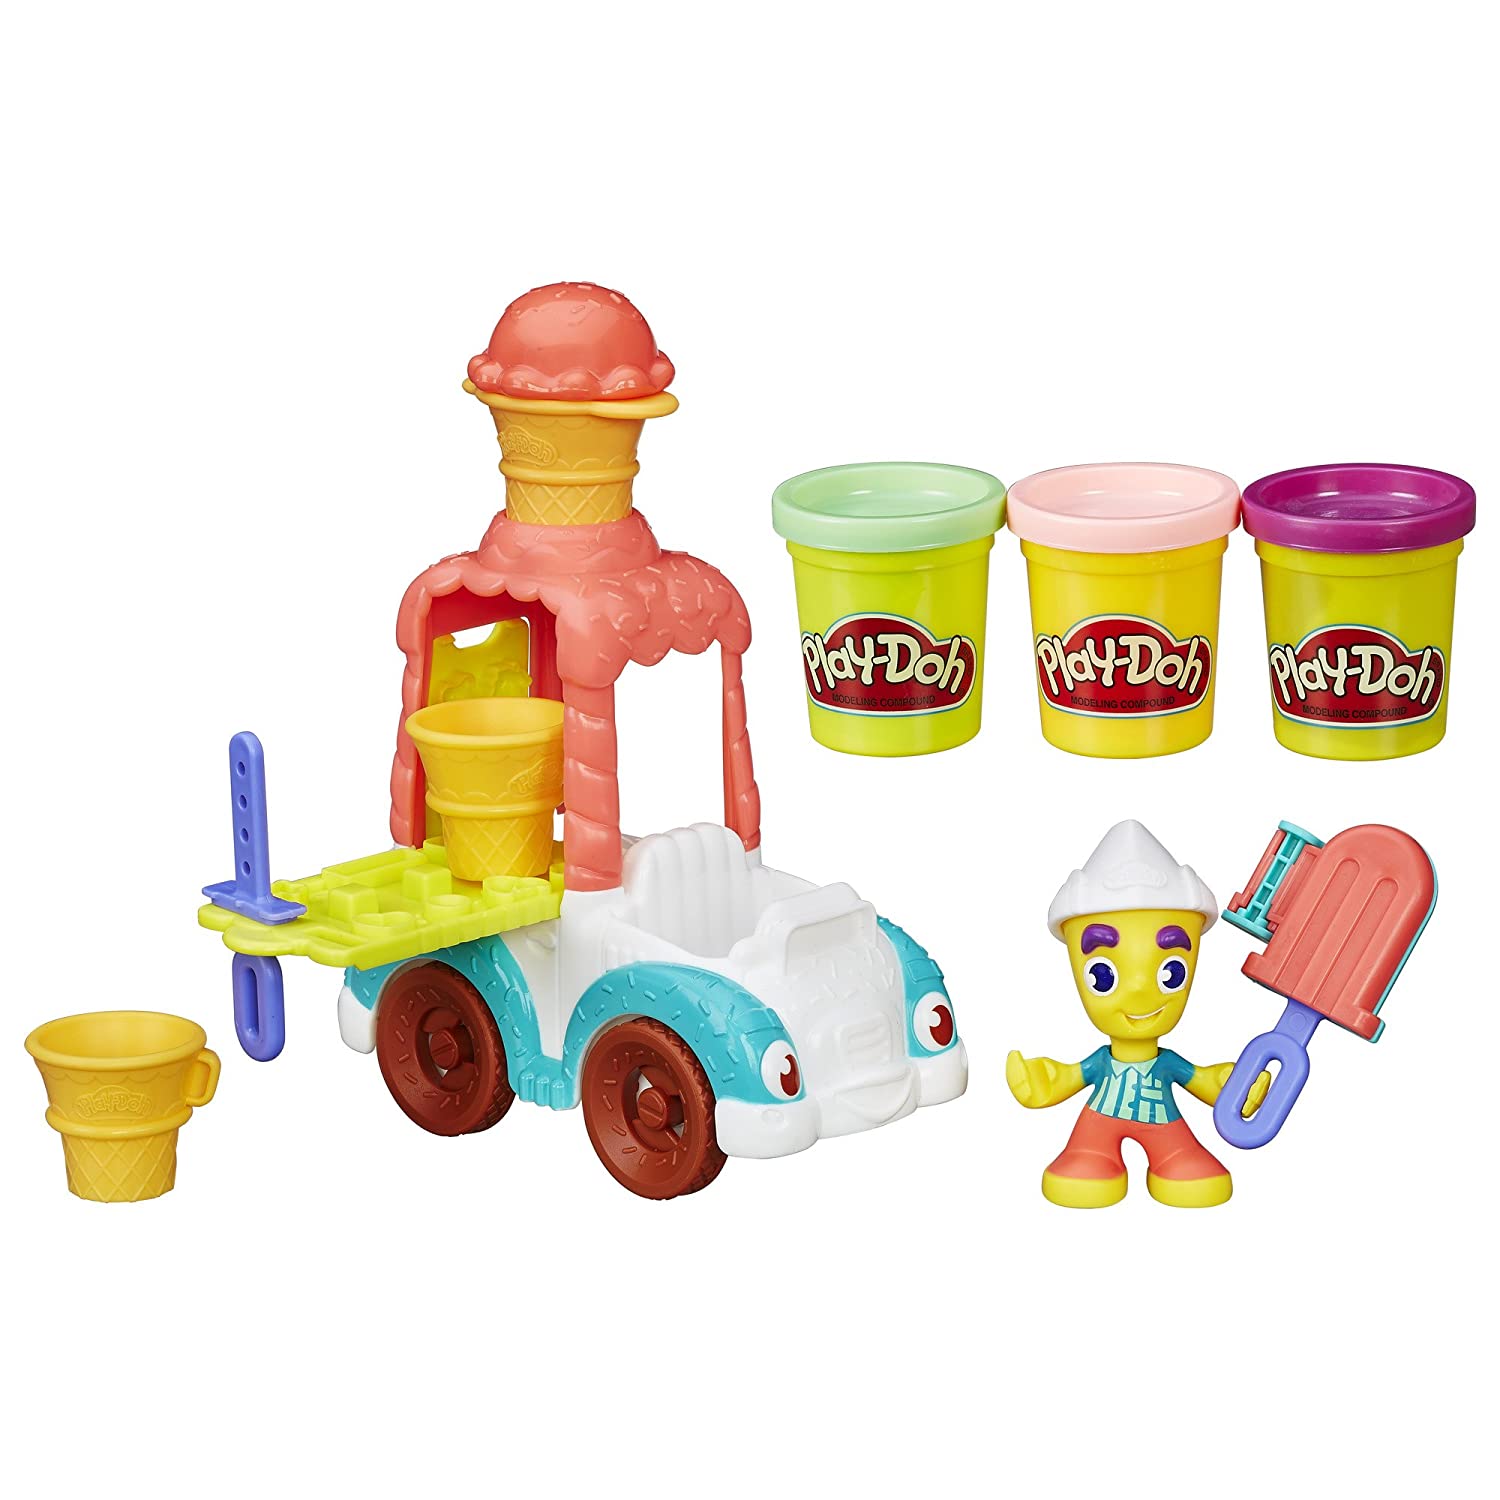 Top 8 Best Play Dough Sets for Boys Reviews in 2023 5